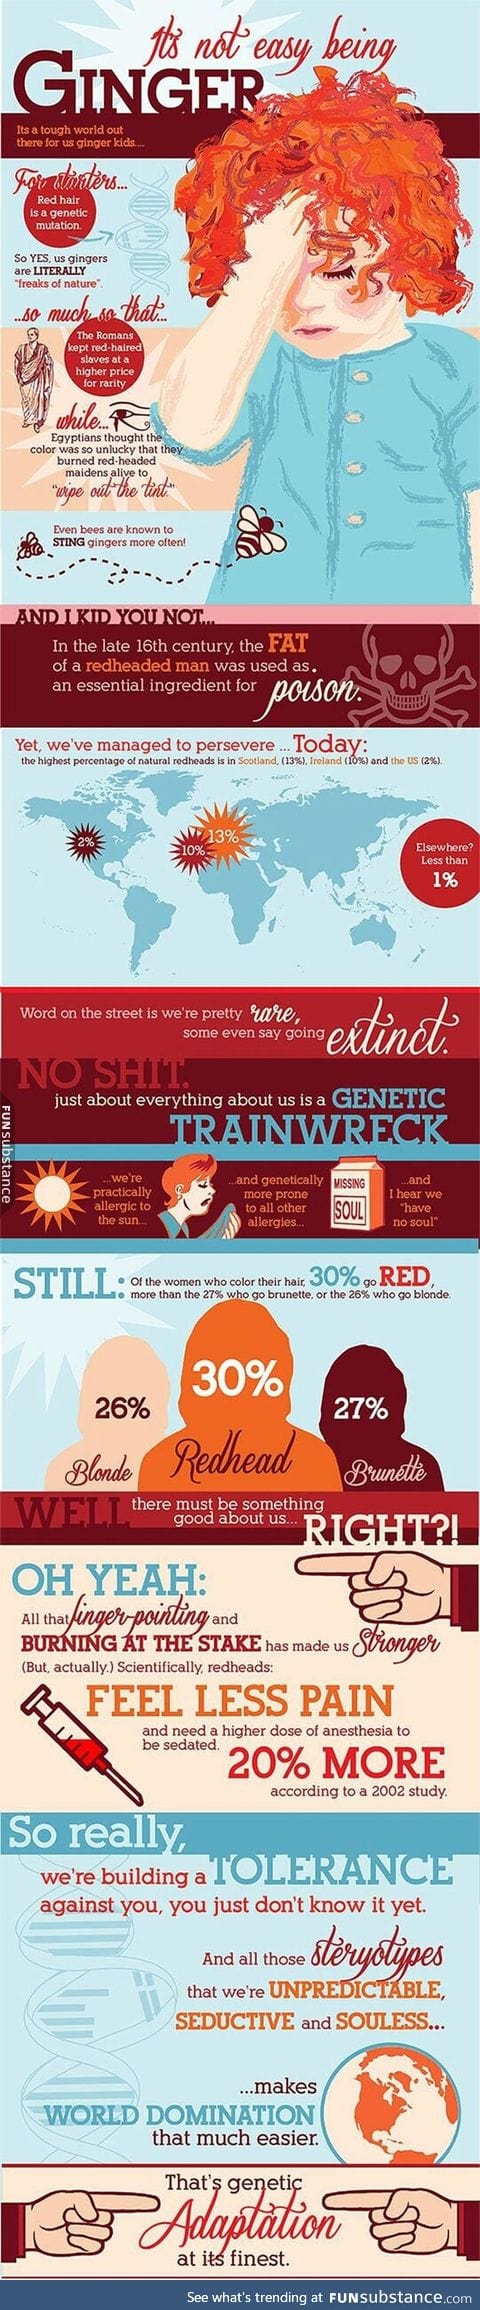 Facts about gingers